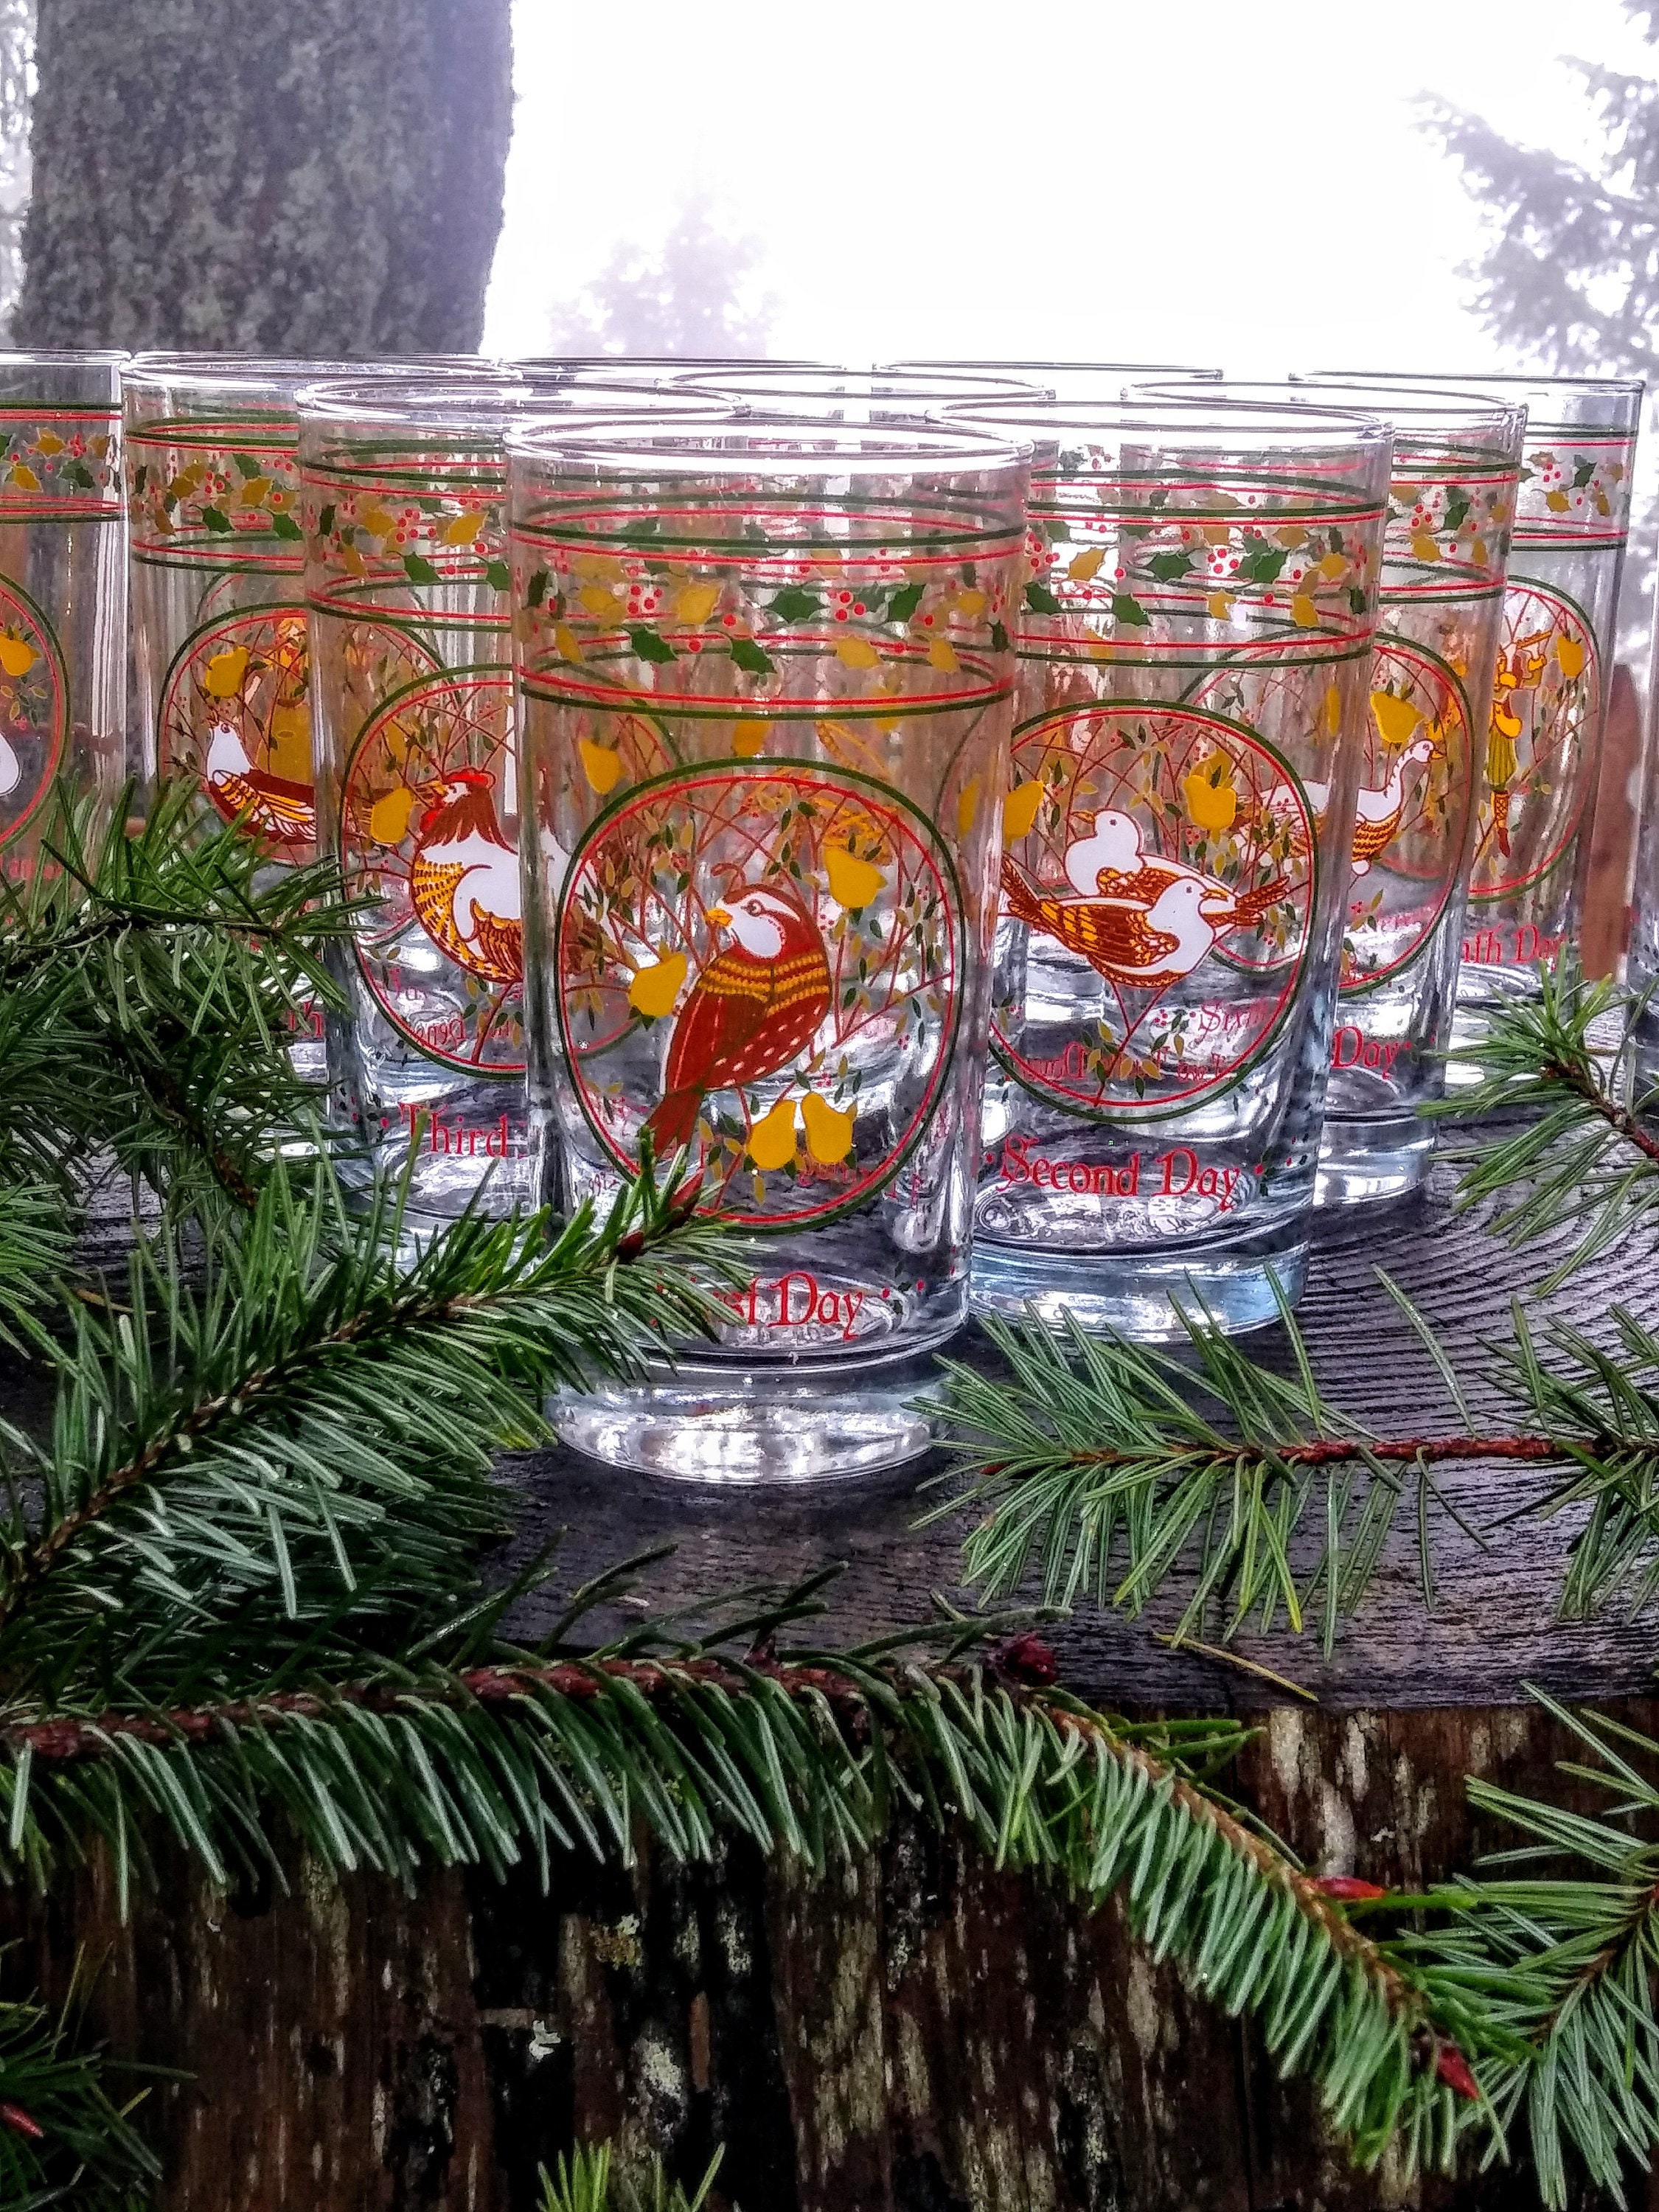 12 Days of Christmas Anchor Hocking set of drinking glasses, vintage  holiday tableware